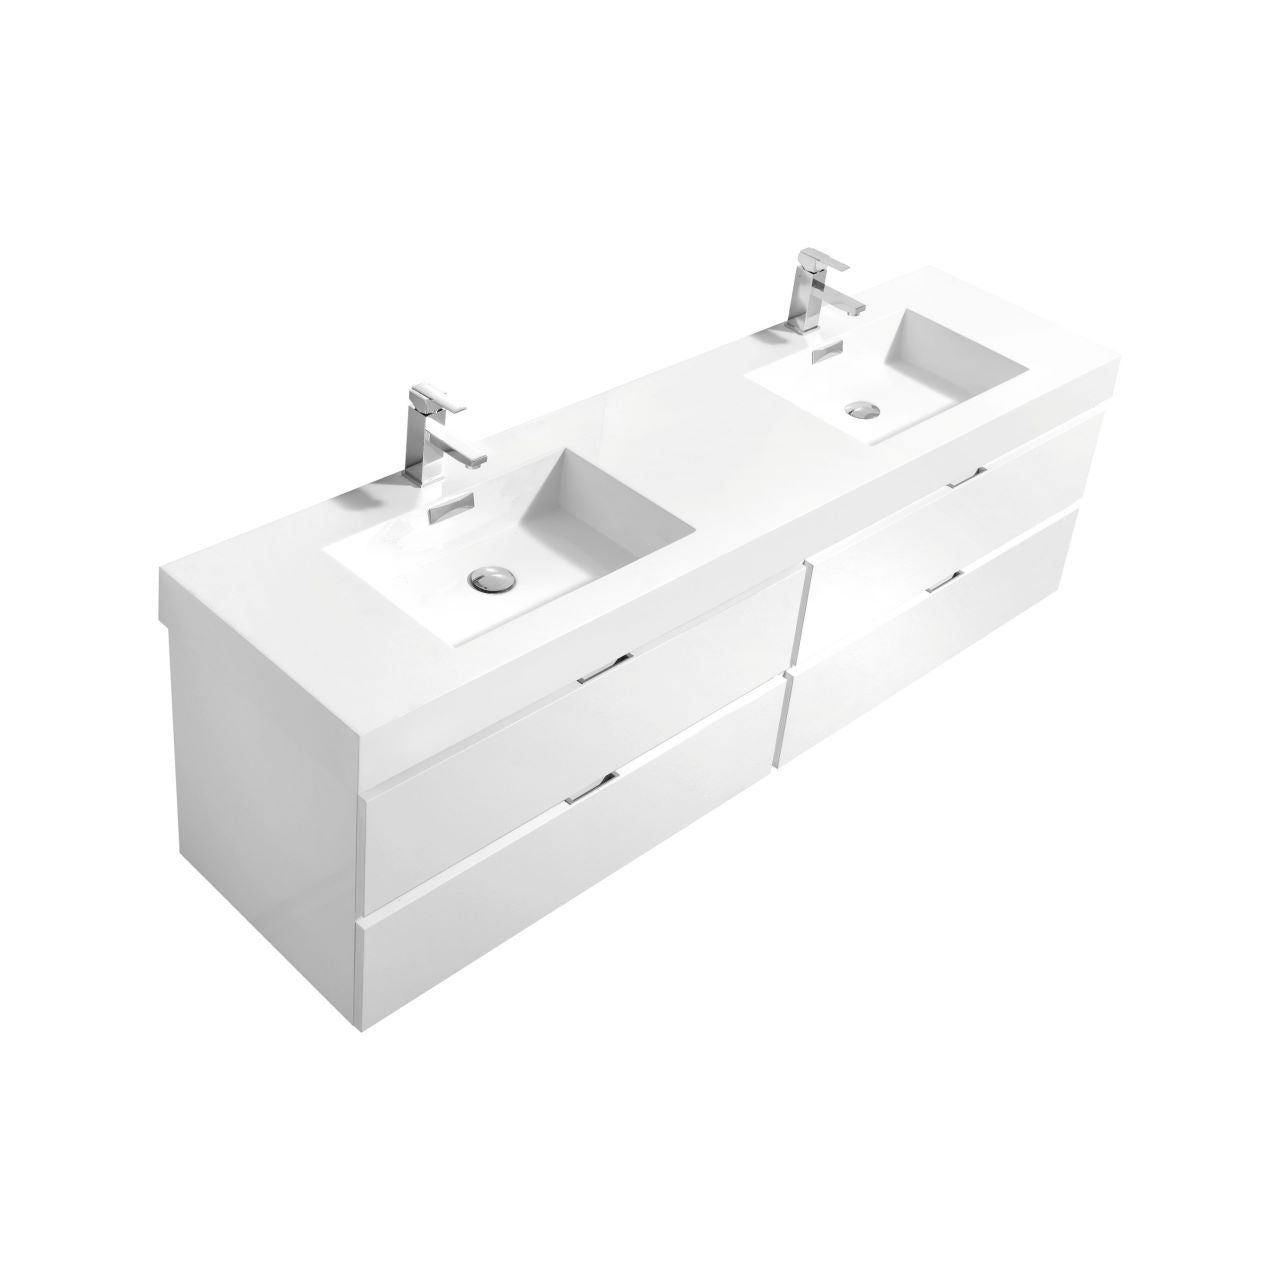 KUBEBATH Bliss BSL80D-GW 80" Double Wall Mount Bathroom Vanity in High Gloss White with White Acrylic Composite, Integrated Sinks, Angled View